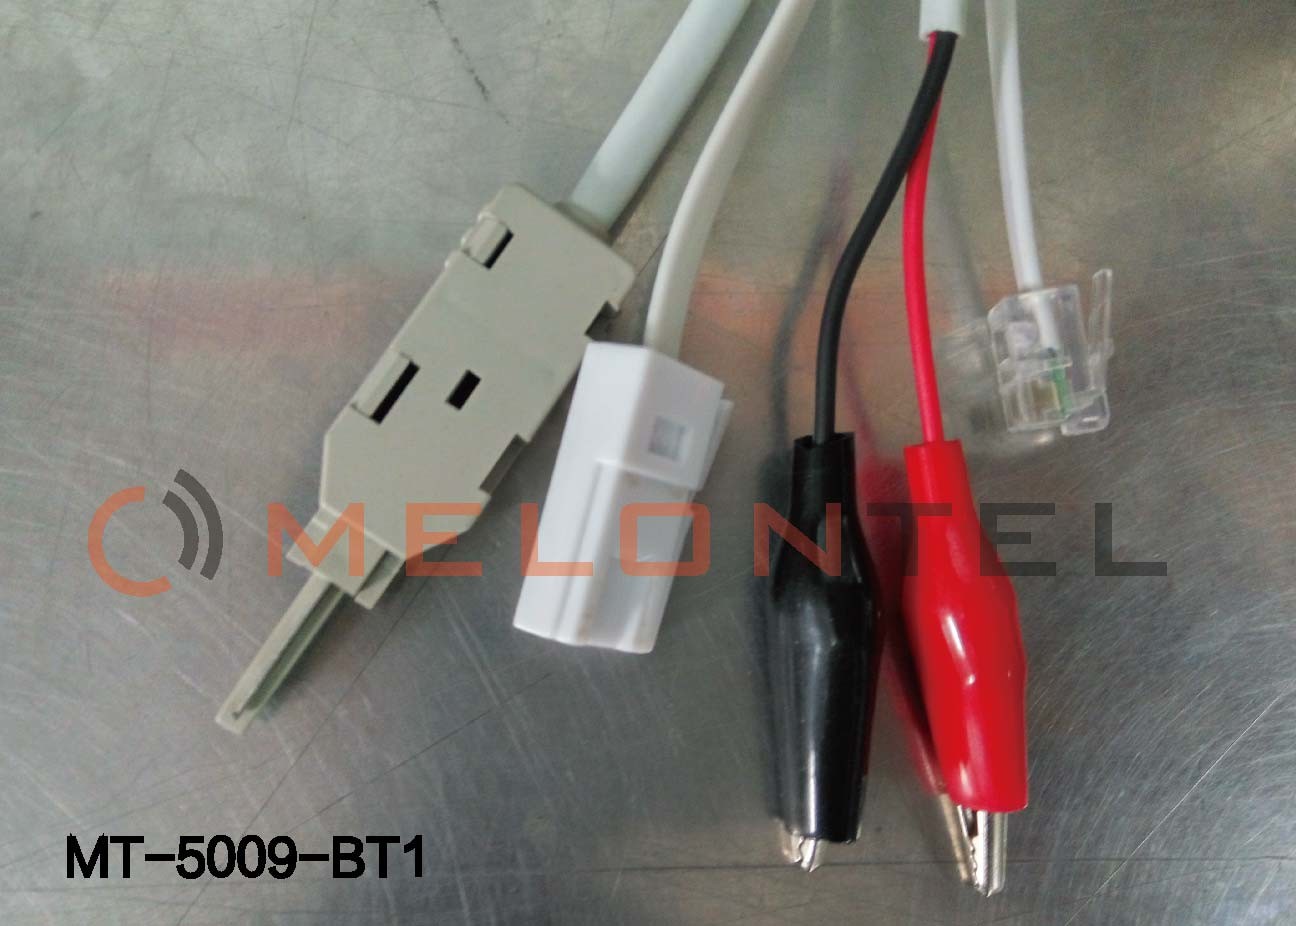 Best BT Style UK Telephone Test Cable ABS PBT Material With RJ11 6P4C Modular Plug wholesale